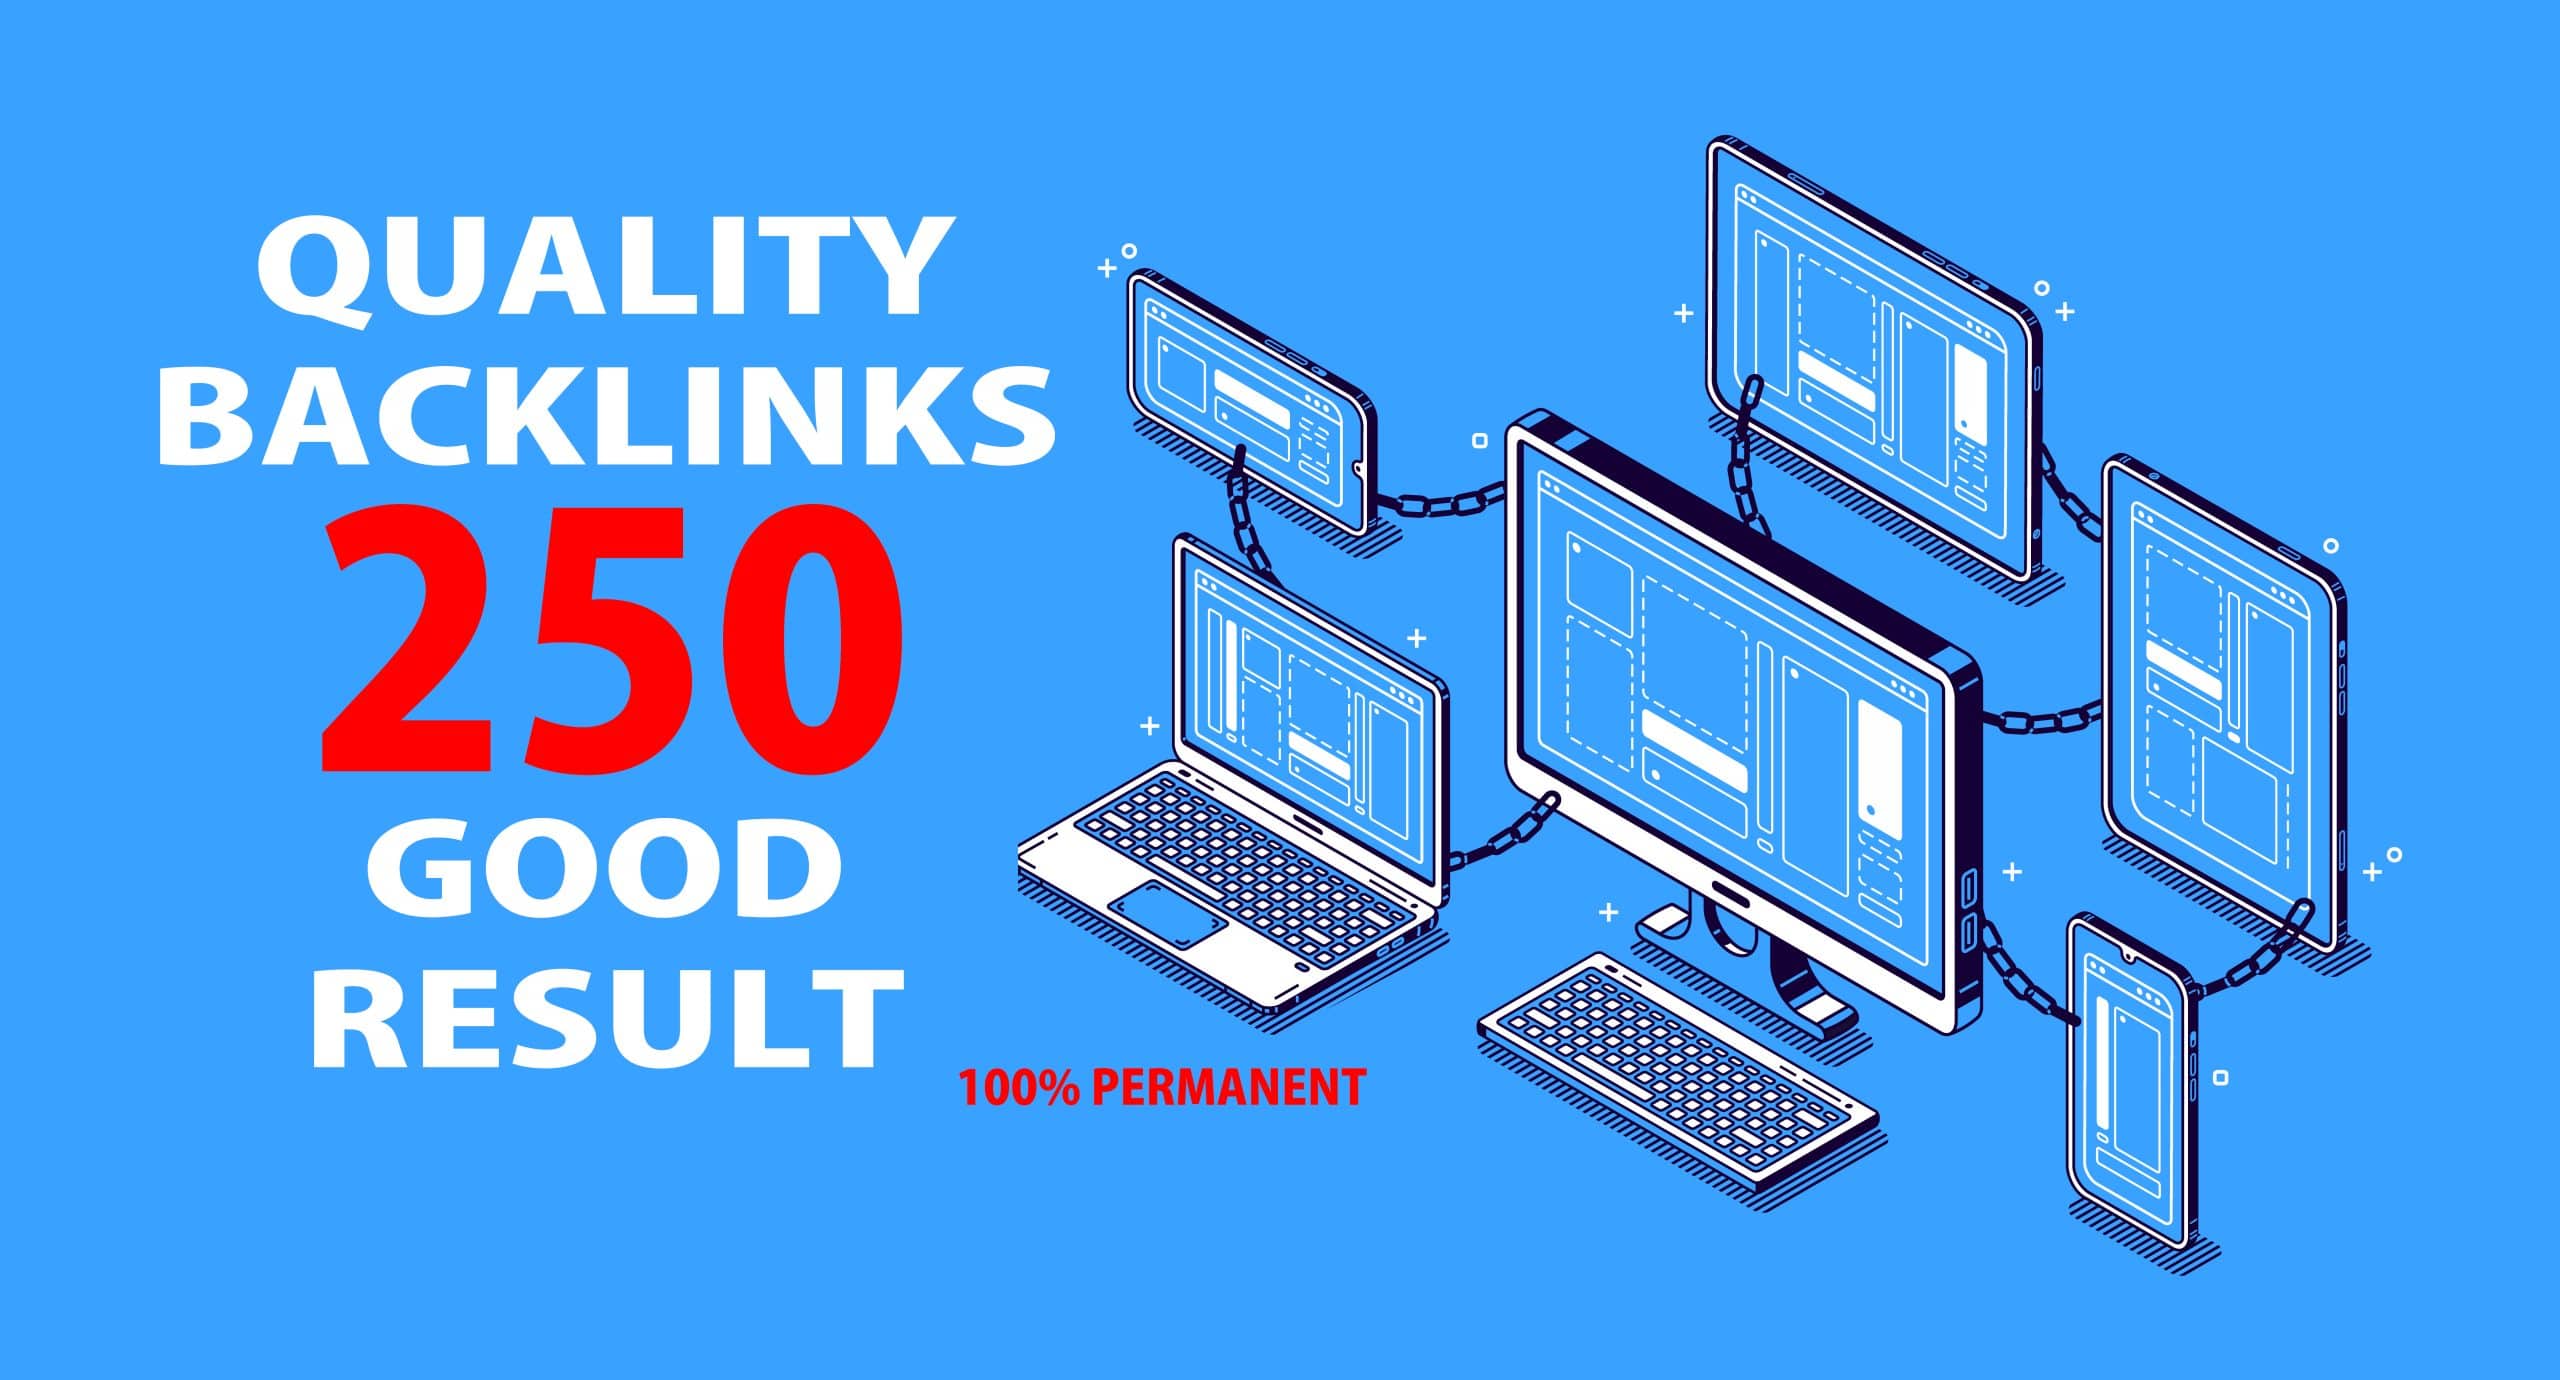 2371030 High-Quality PBN Backlinks with DA 50+ and Dofollow Links